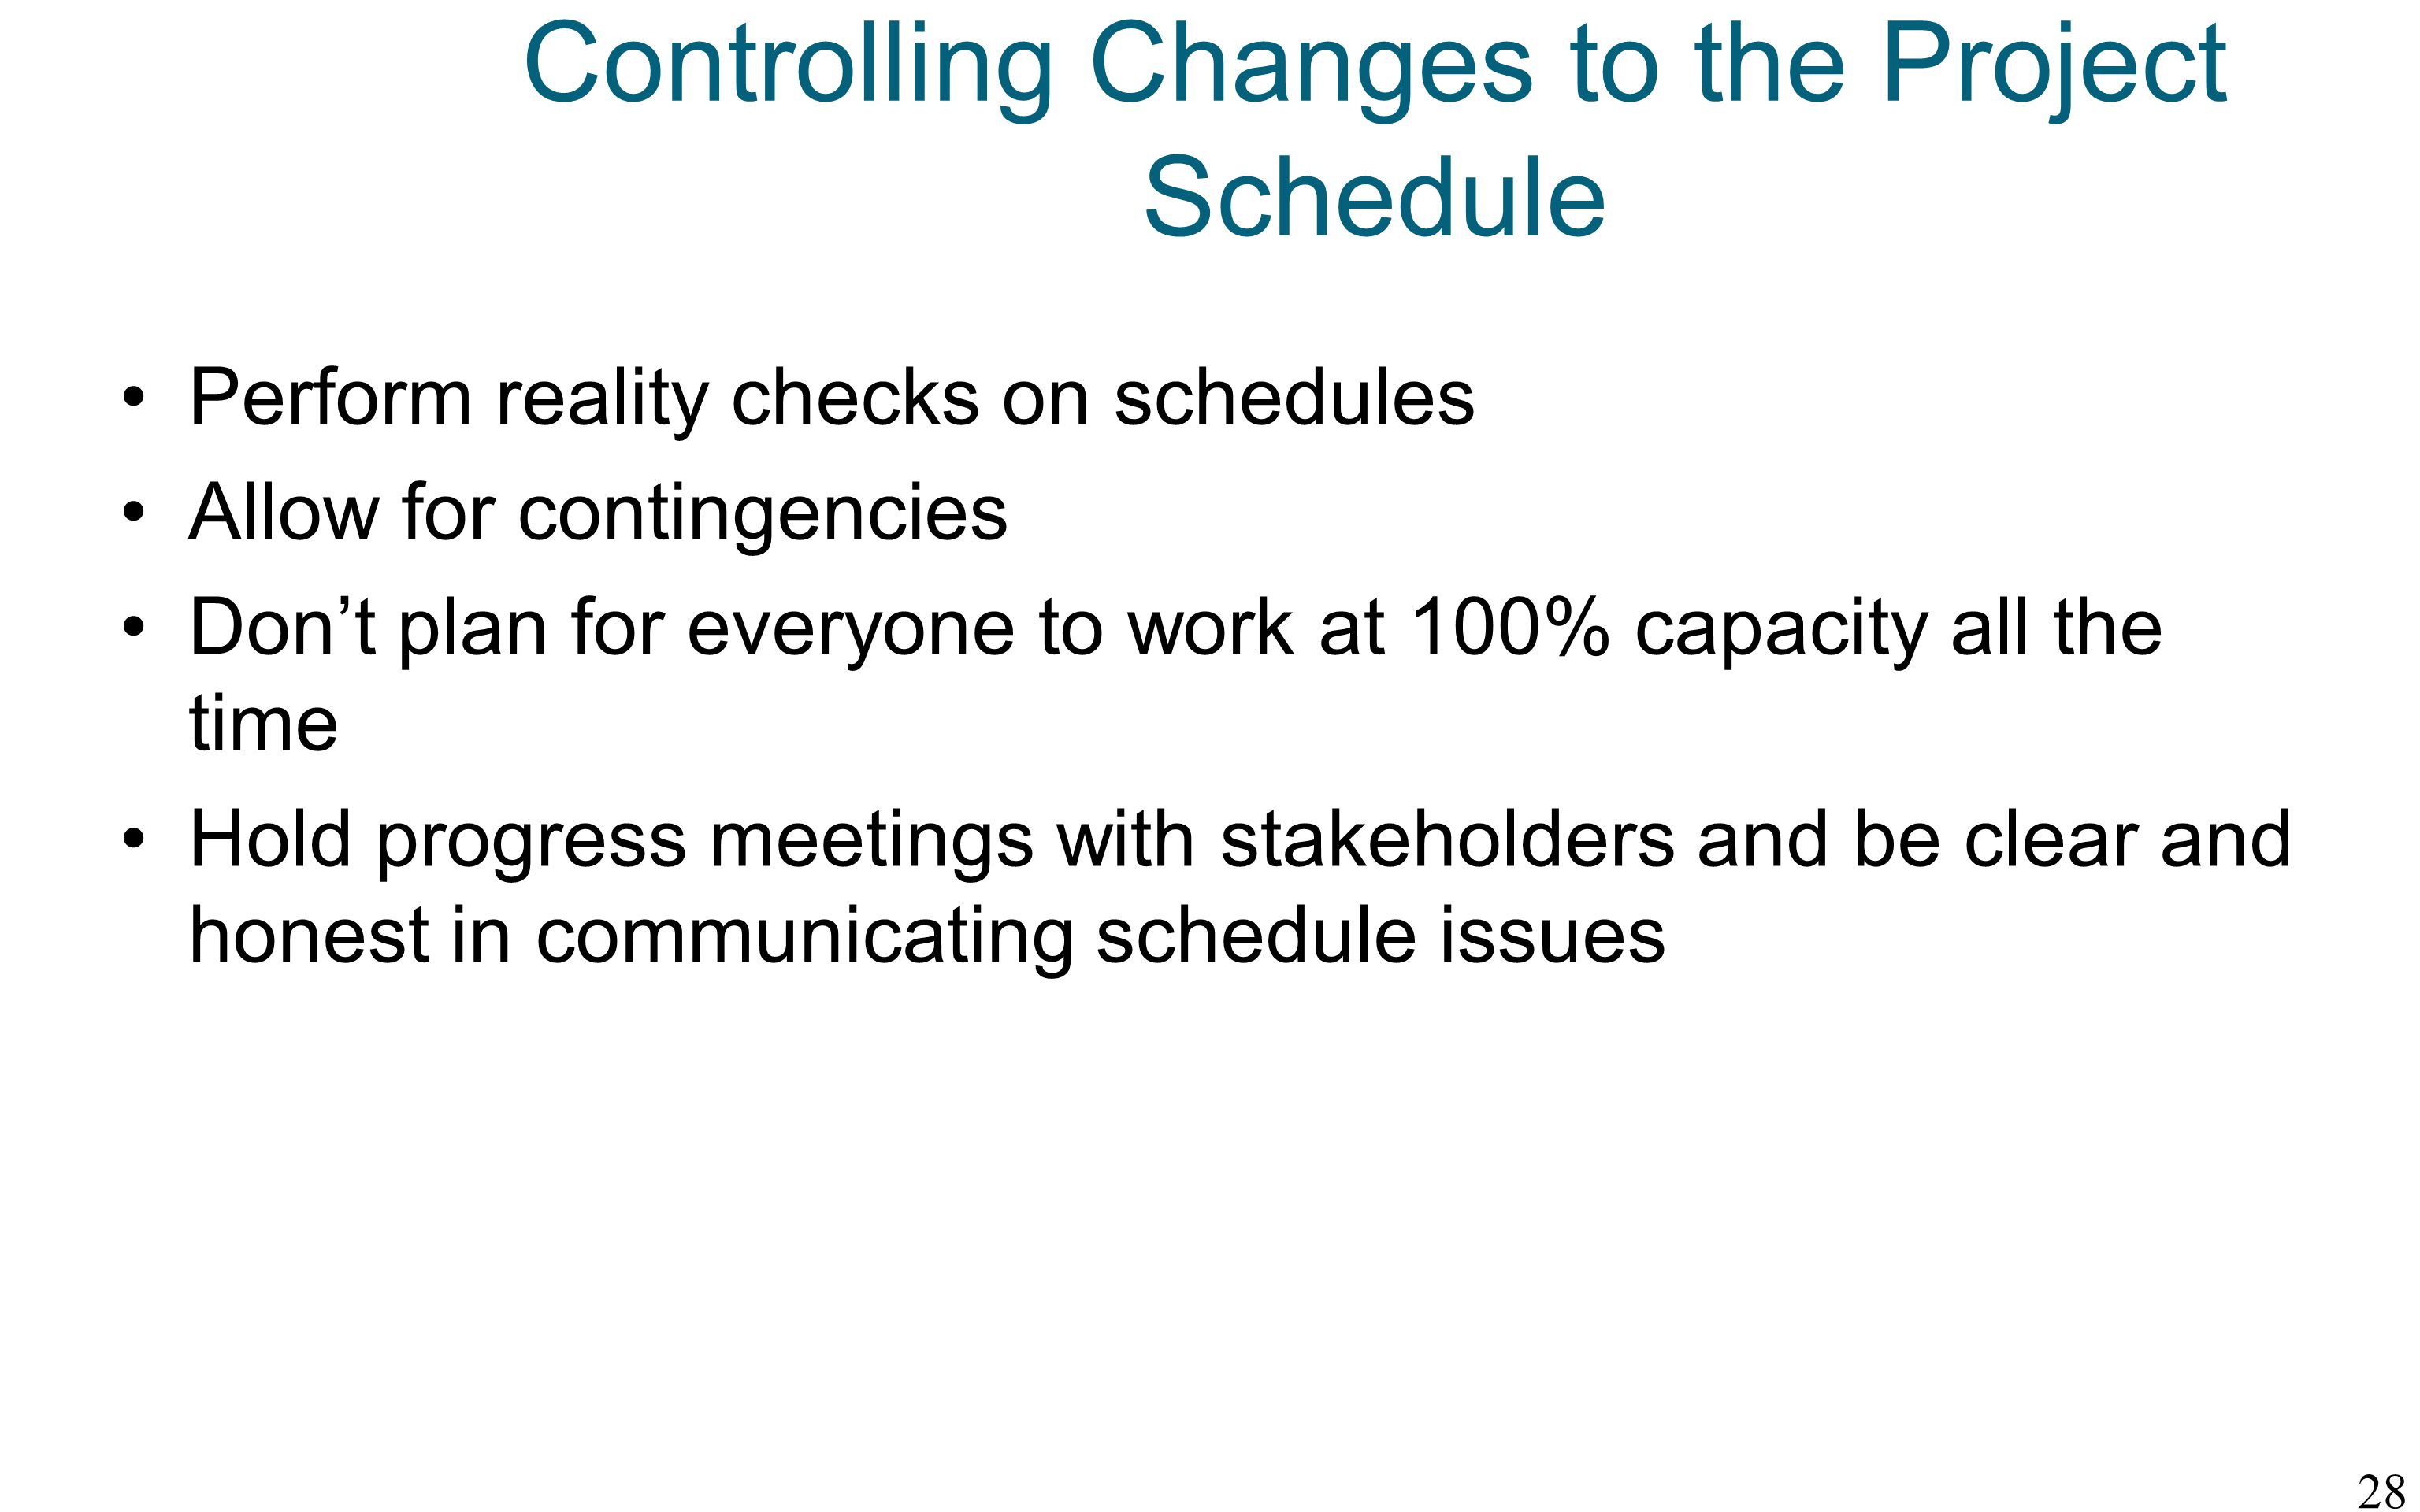 Controlling Changes to the Project Schedule